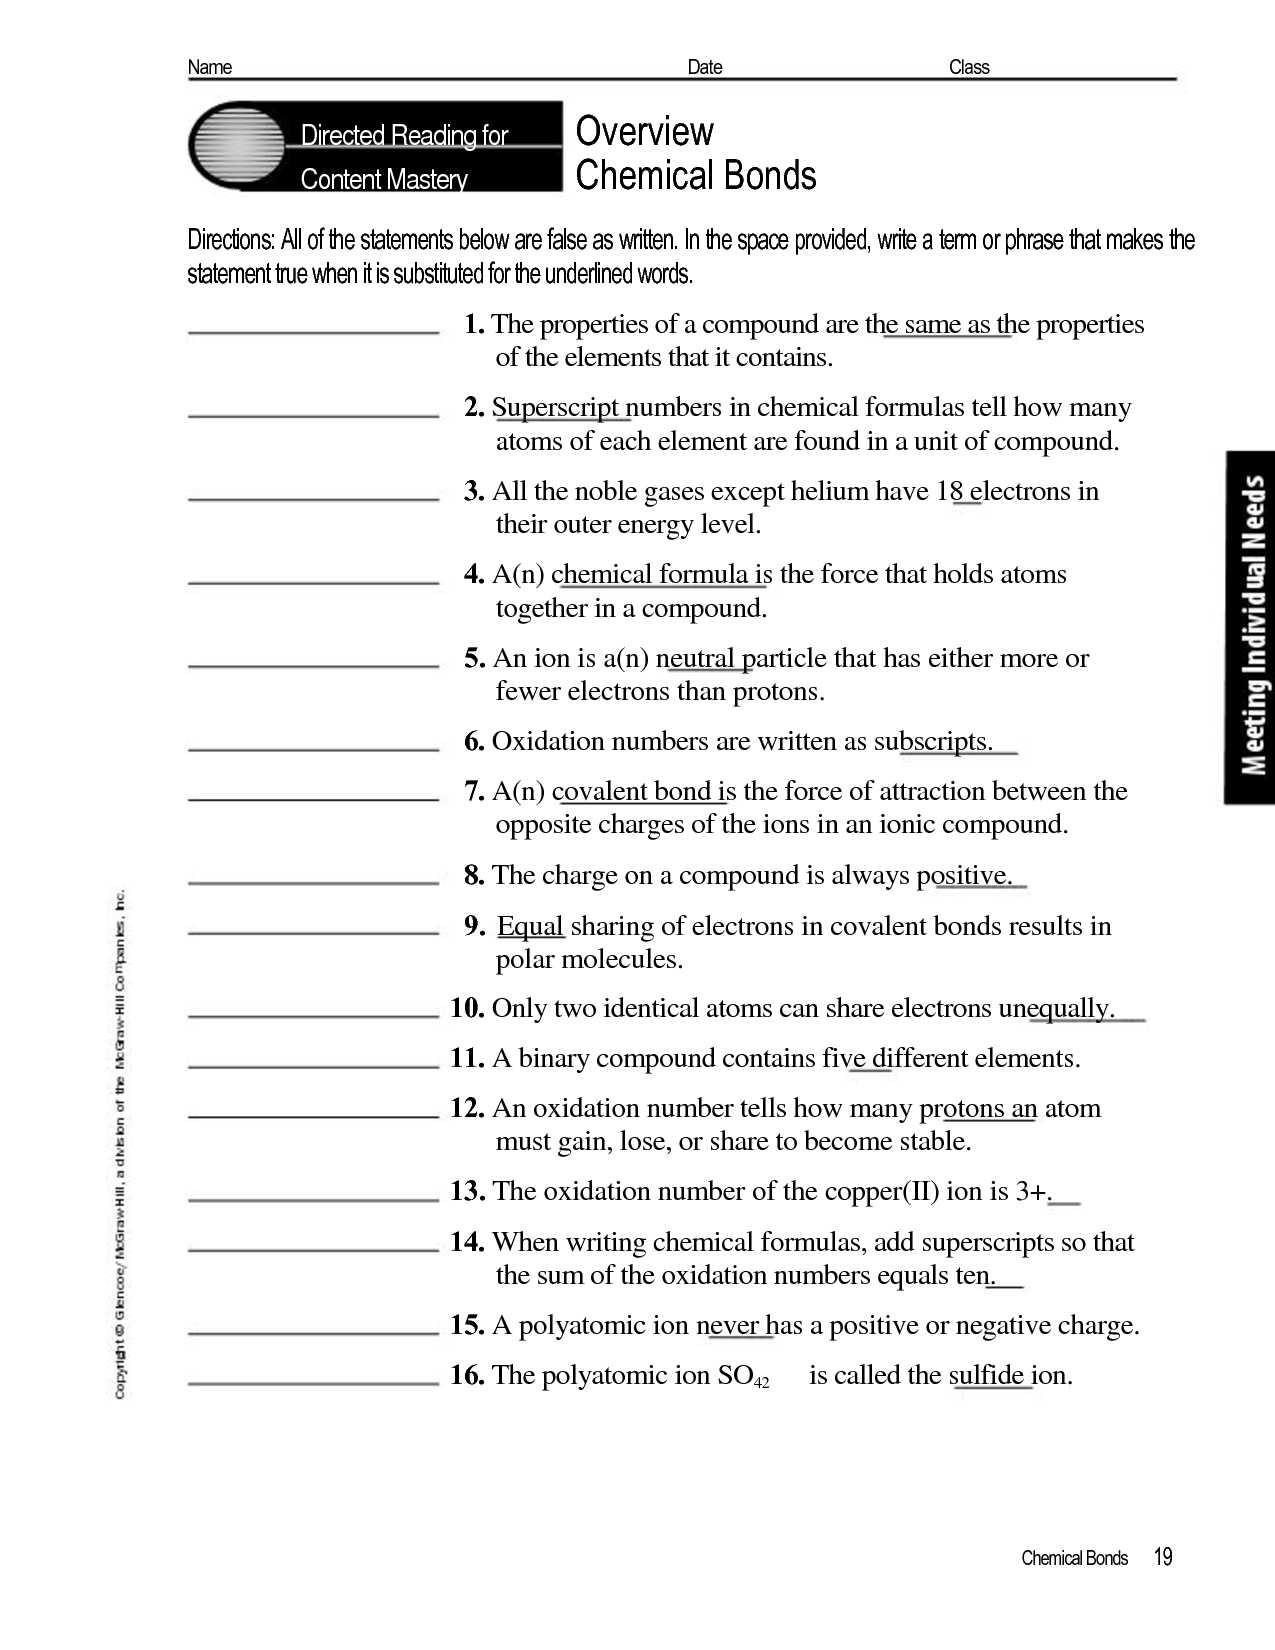 Skills Worksheet Directed Reading A Answer Key and Environmental Science Crossword Puzzle Pdf Answers for Chapter